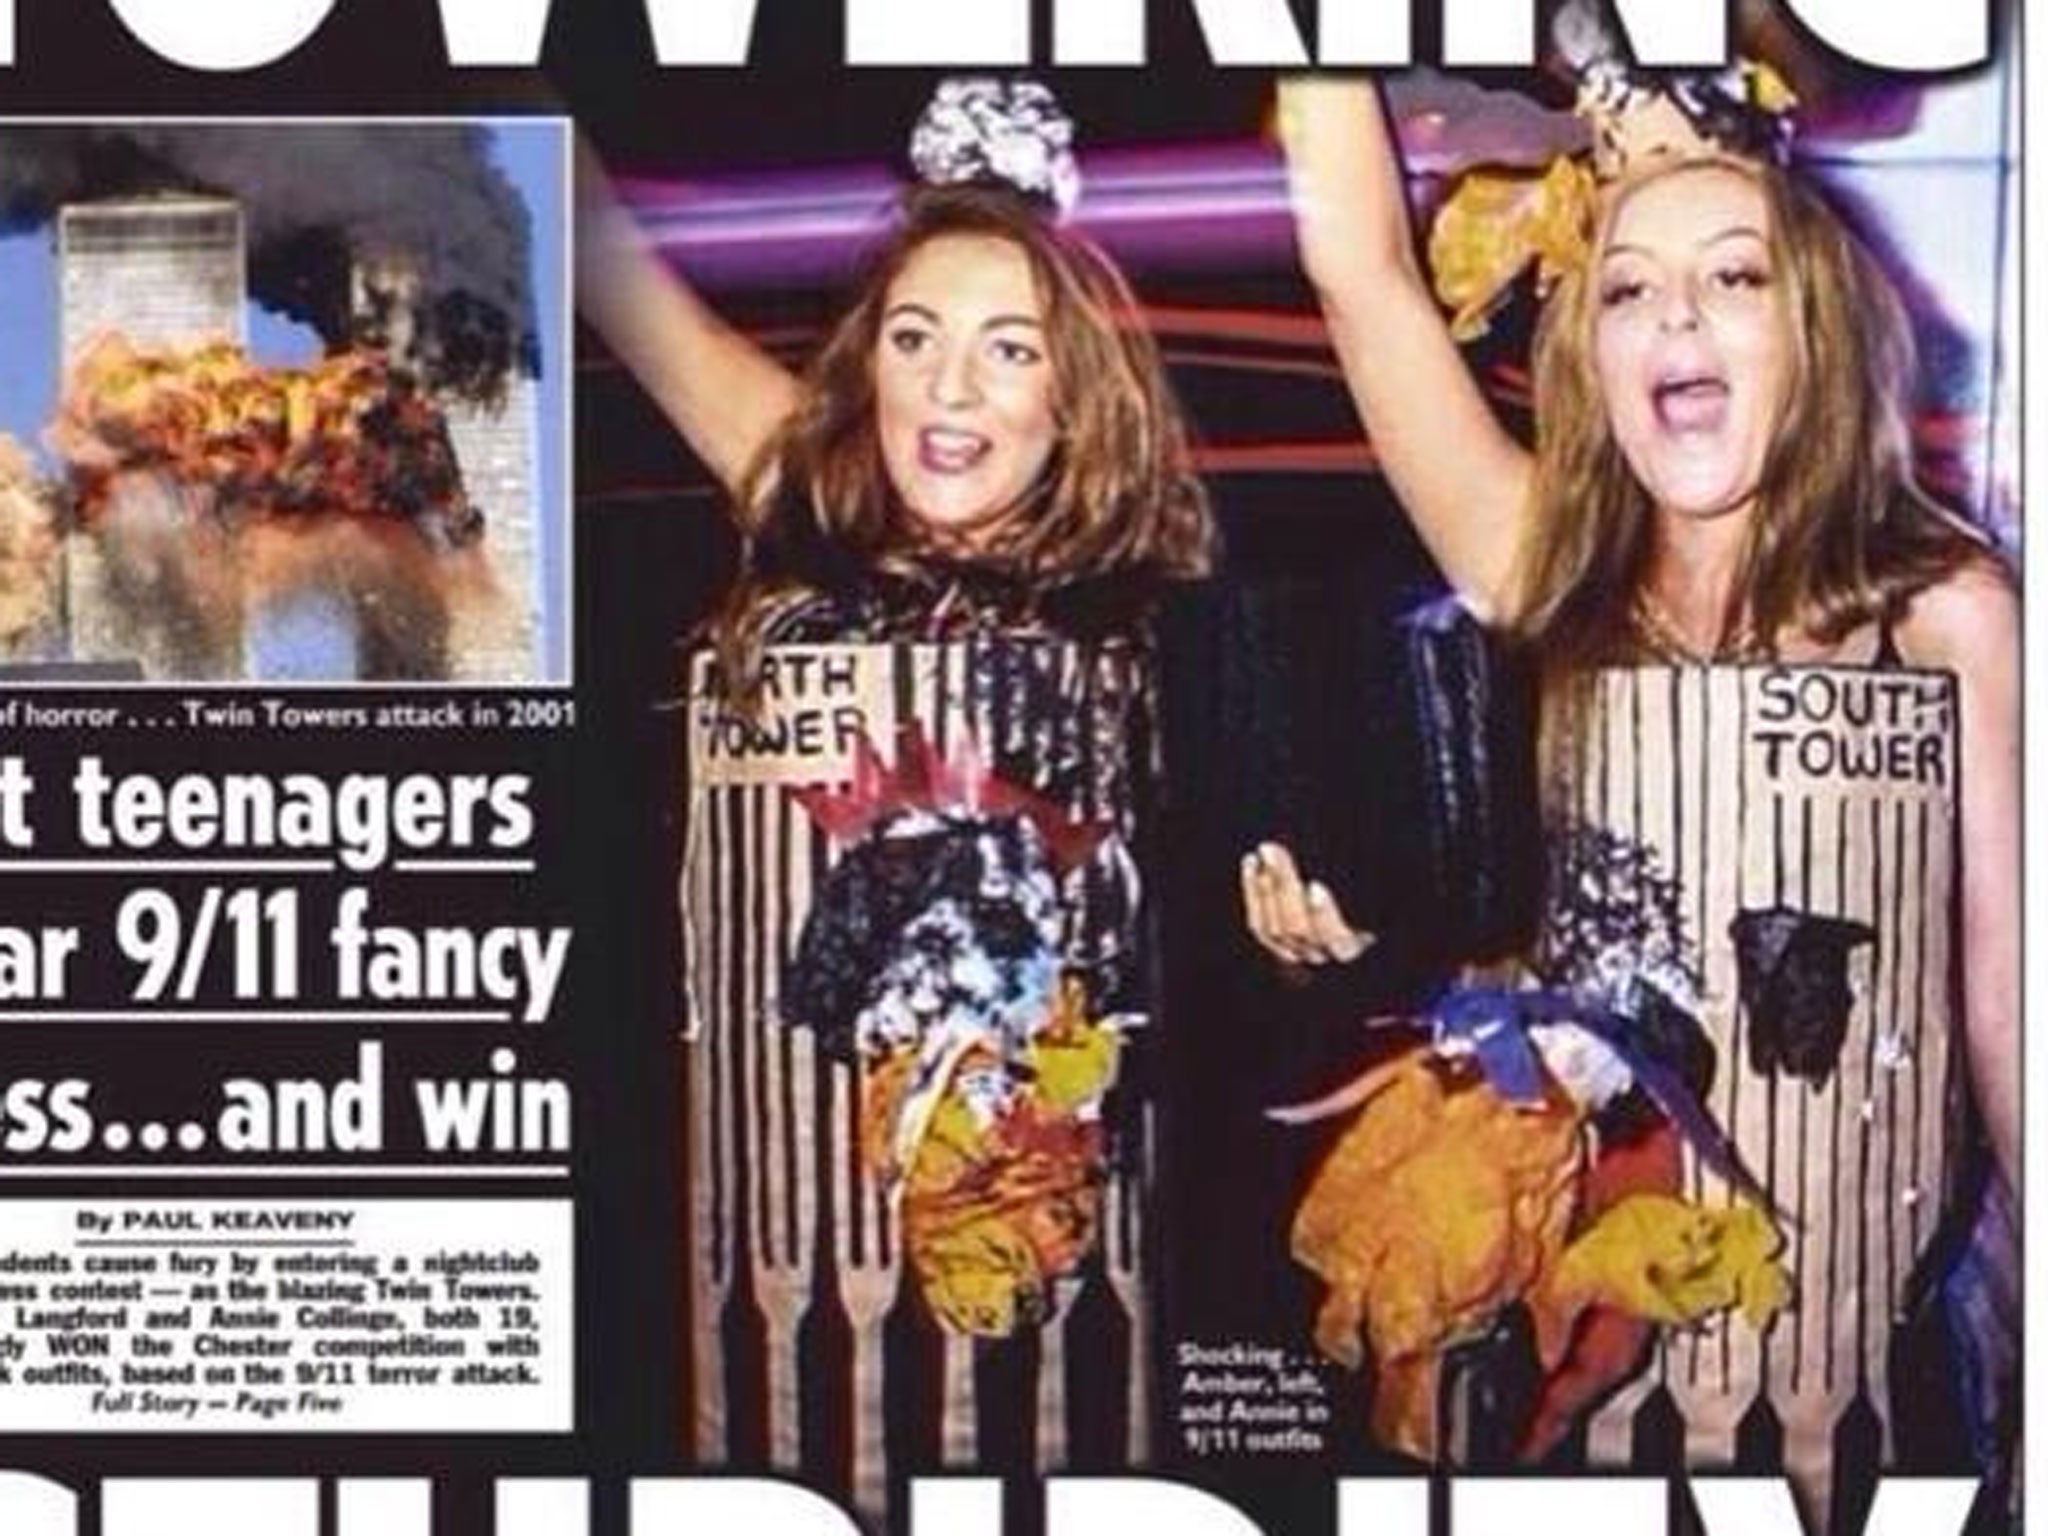 The front page of Wednesday's The Sun showed Amber Langford and Annie Collinge dressed as the burning Twin Towers for a Halloween costume competition